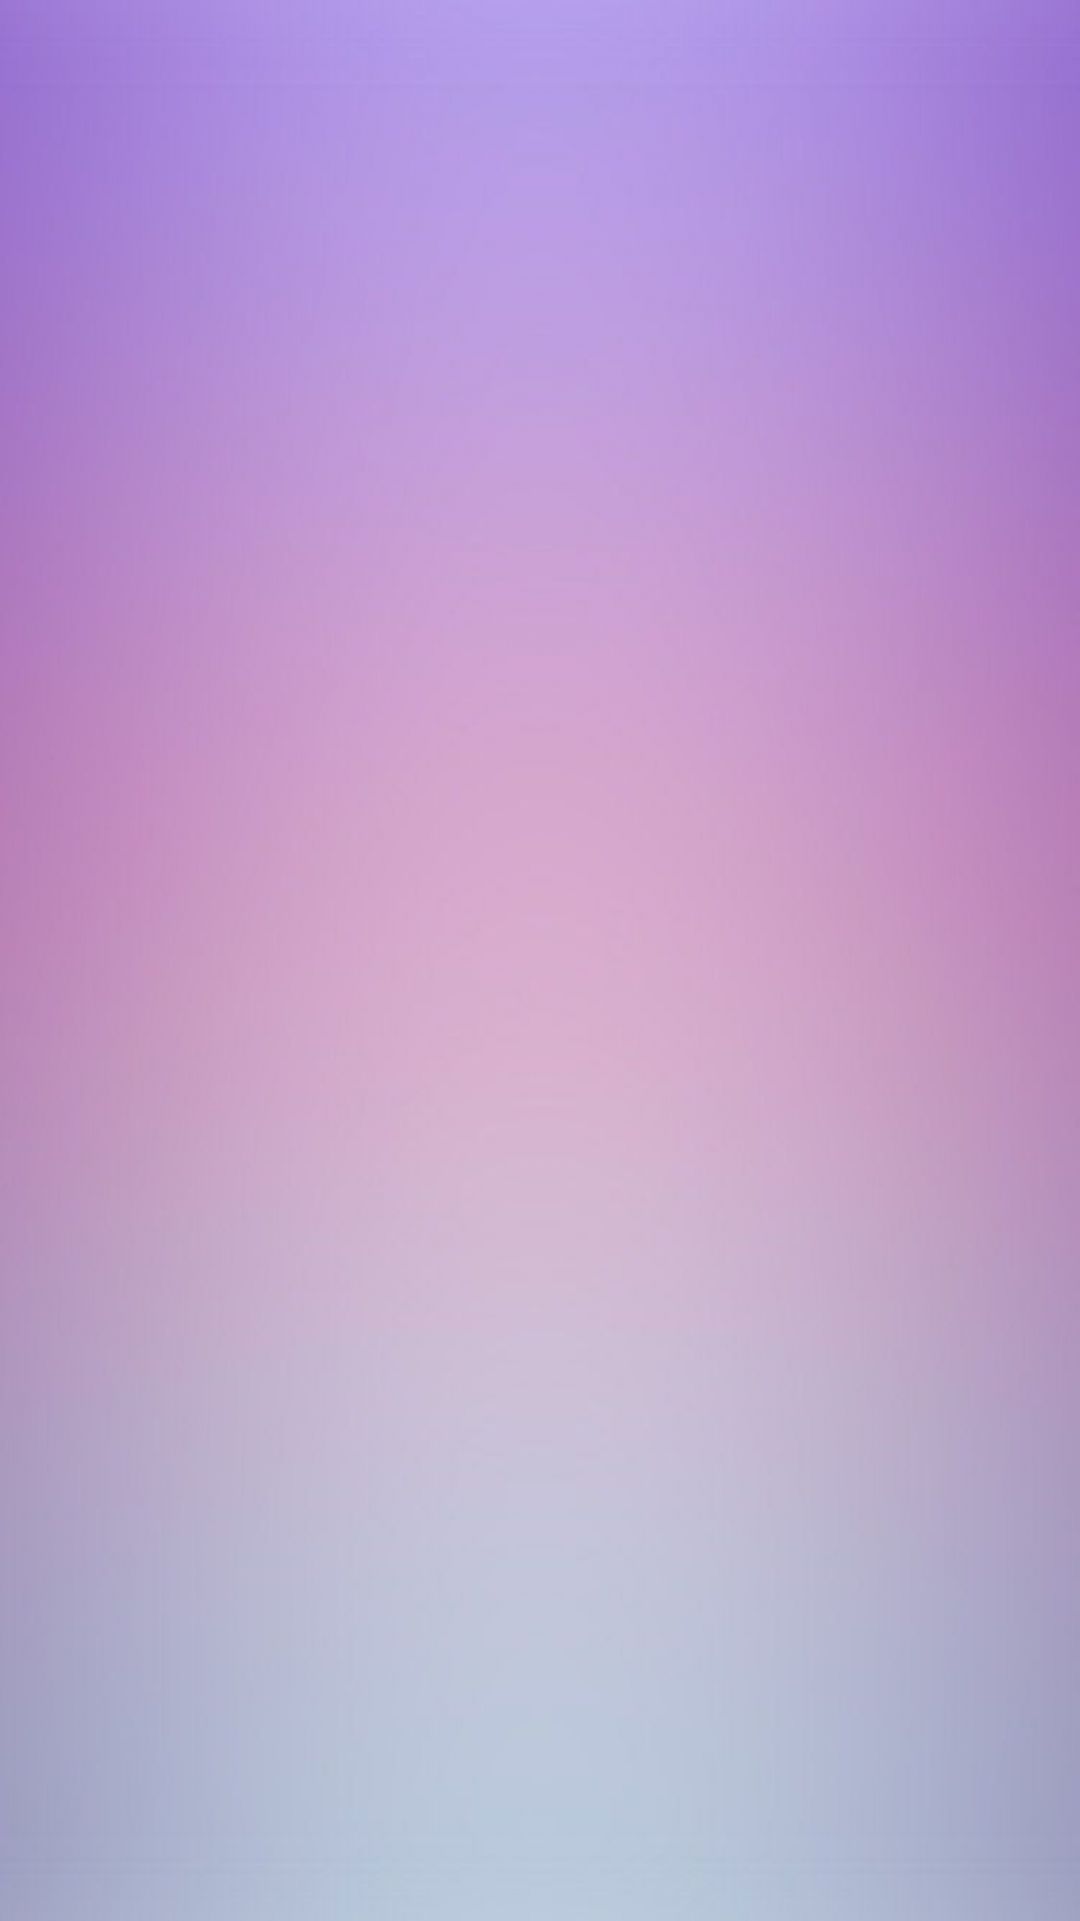 ✓[75+] iPhone7 wallpaper. purple sky soft pastel blur - Android / iPhone HD  Wallpaper Background Download (png / jpg) (2023)